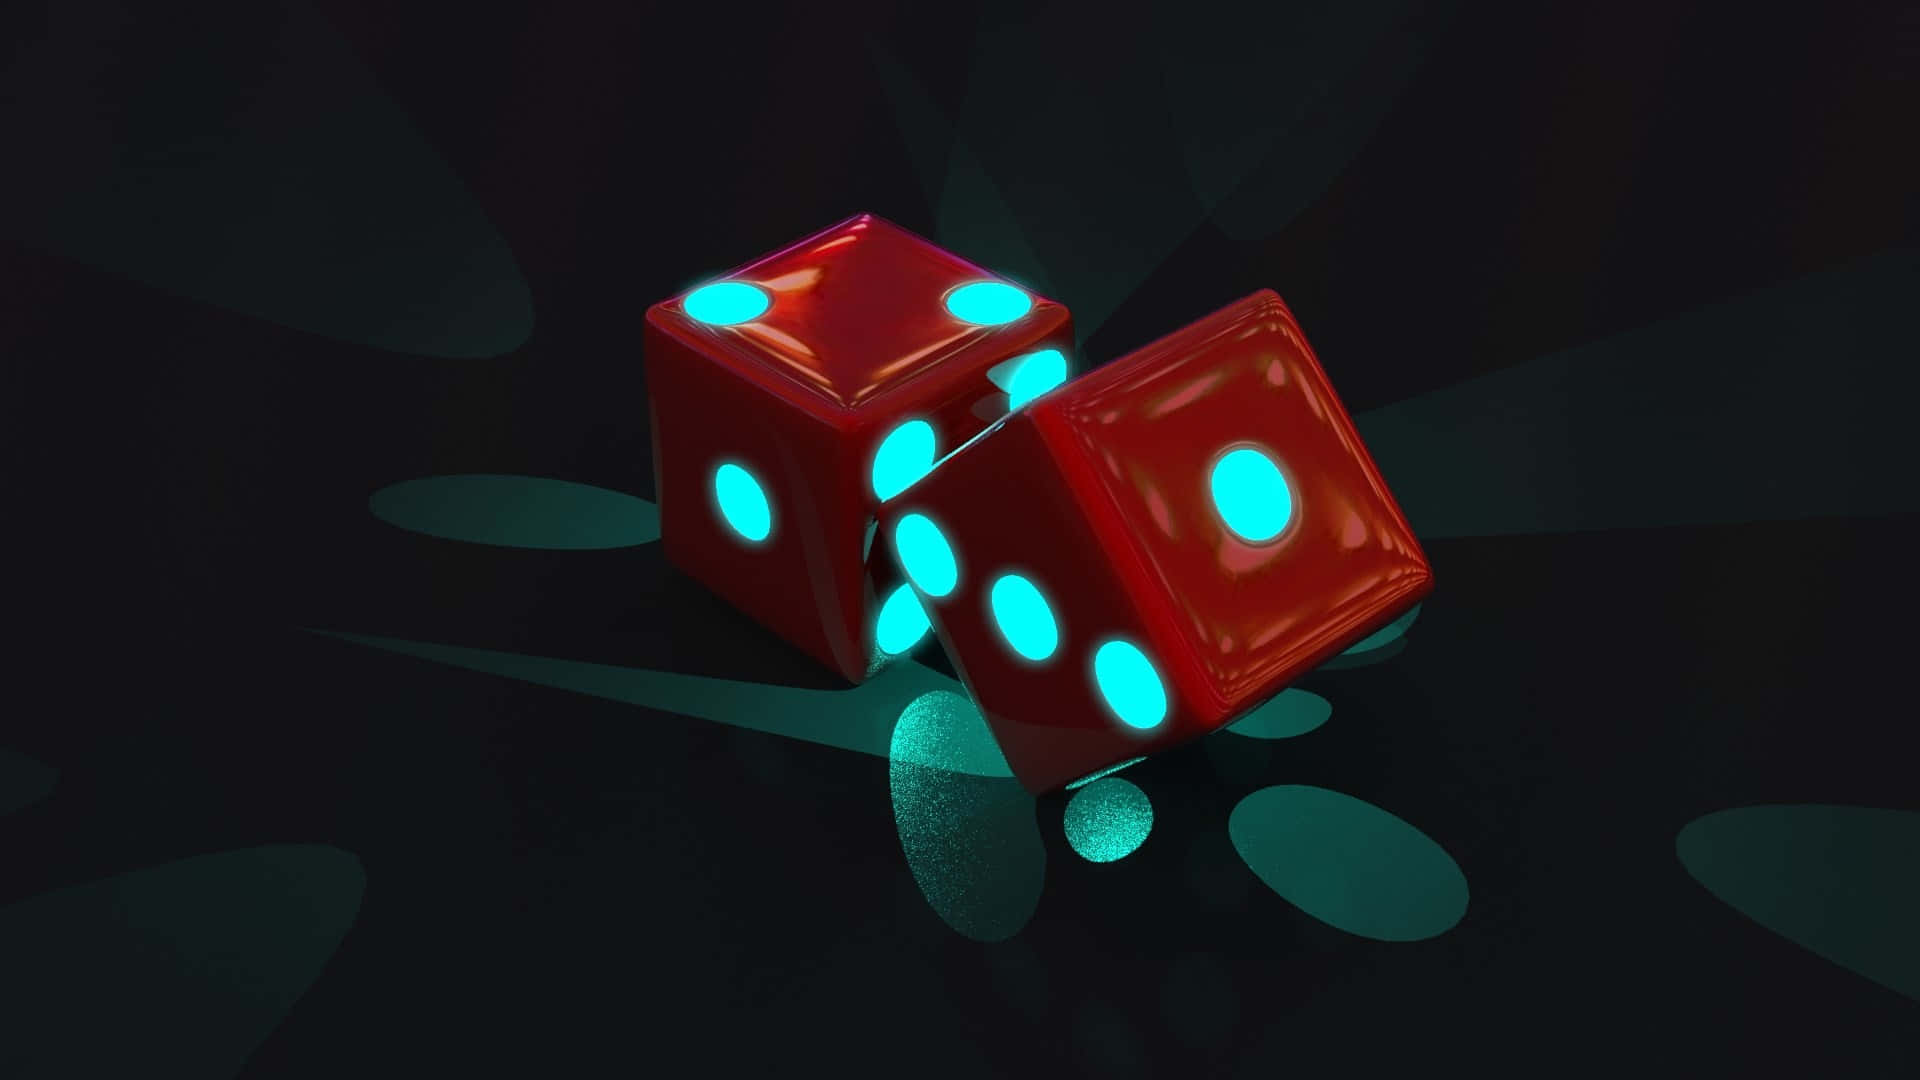 Red Dice Shadows Game Night Wallpaper